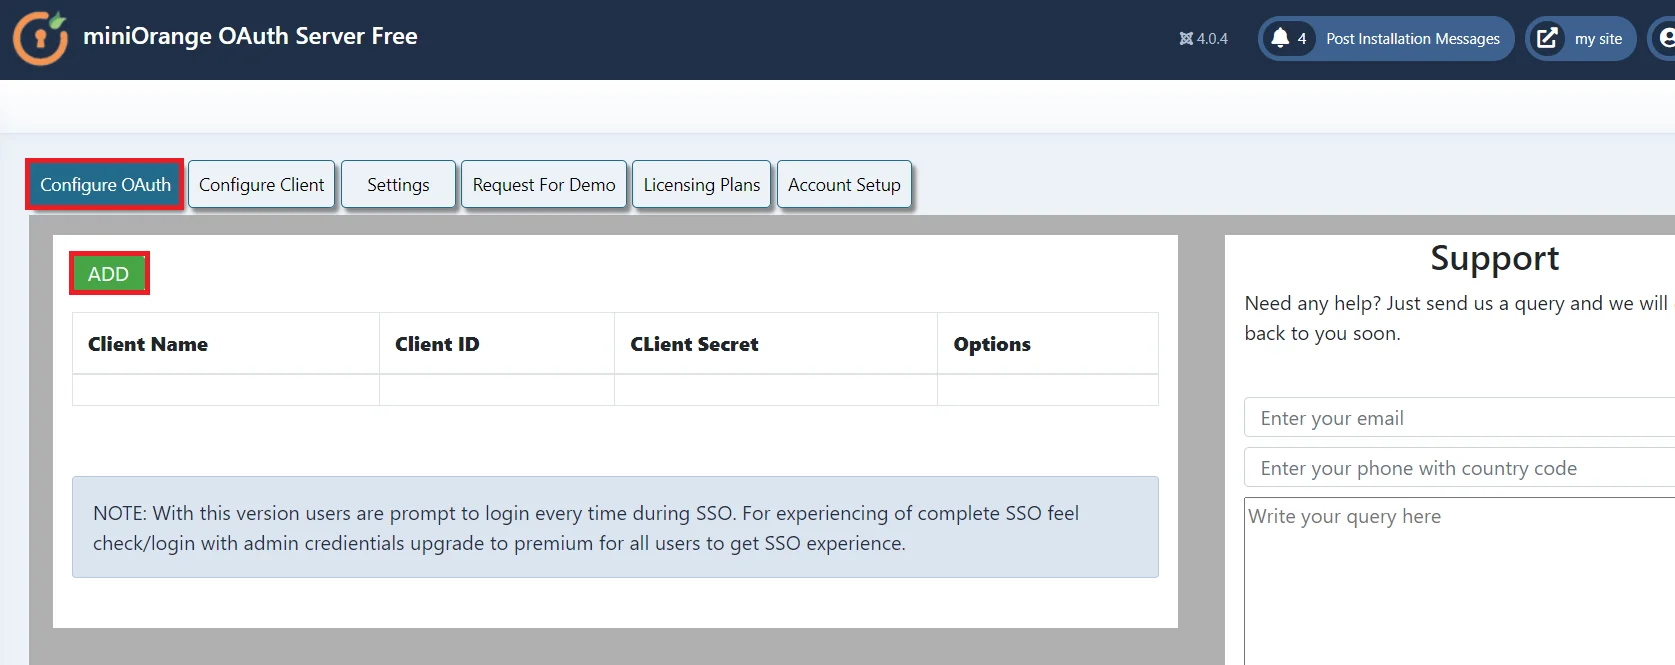 Integration of Oauth Provider into Joomla using Oauth Single-Sign-On (SSO), Add Client